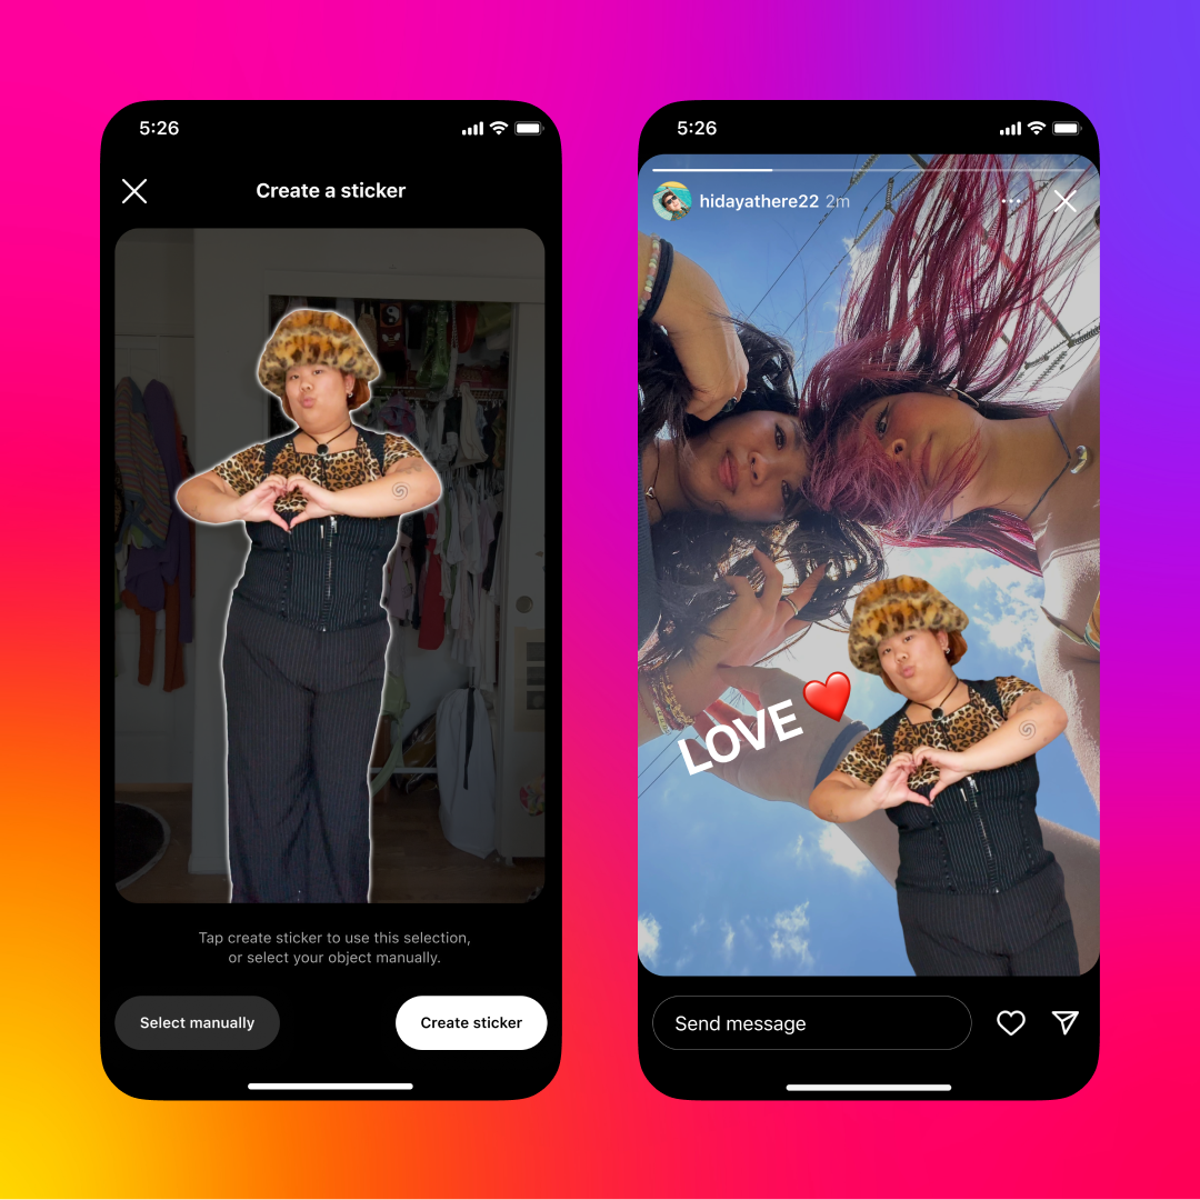 How to use Instagram stickers: New additions let you share secret stories, music and Polaroids